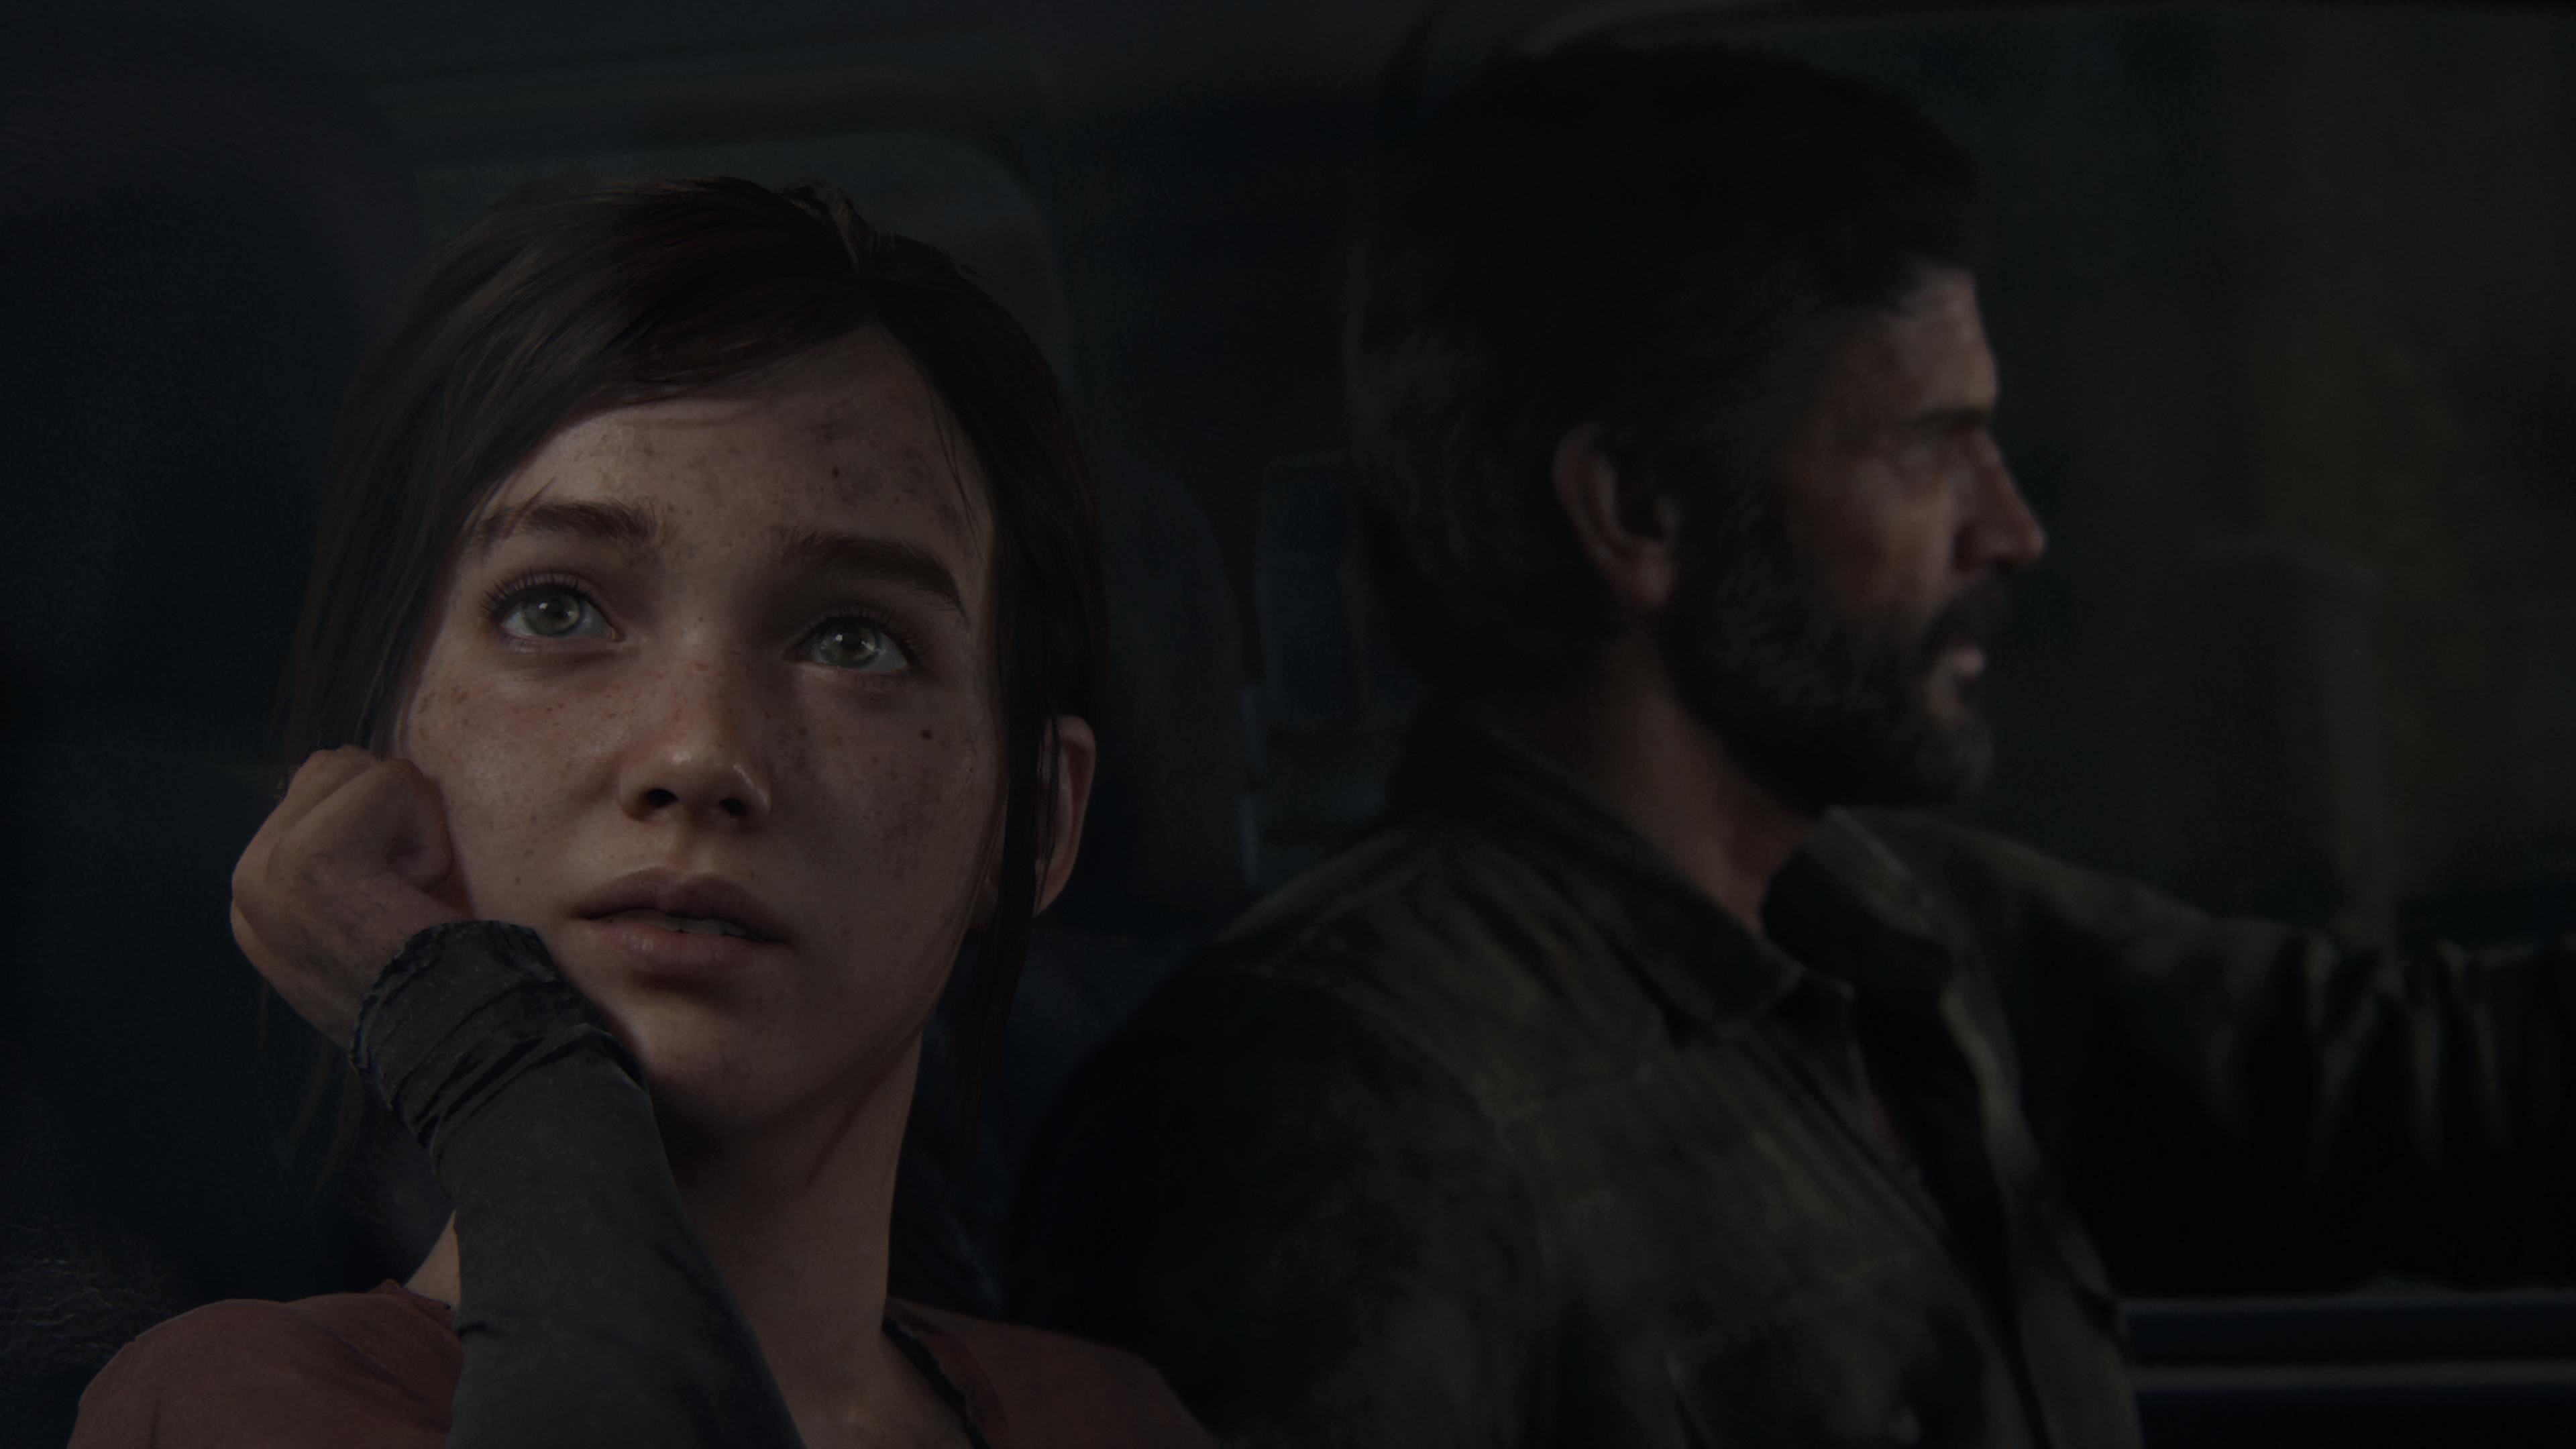 The Last Of Us Hbo Series